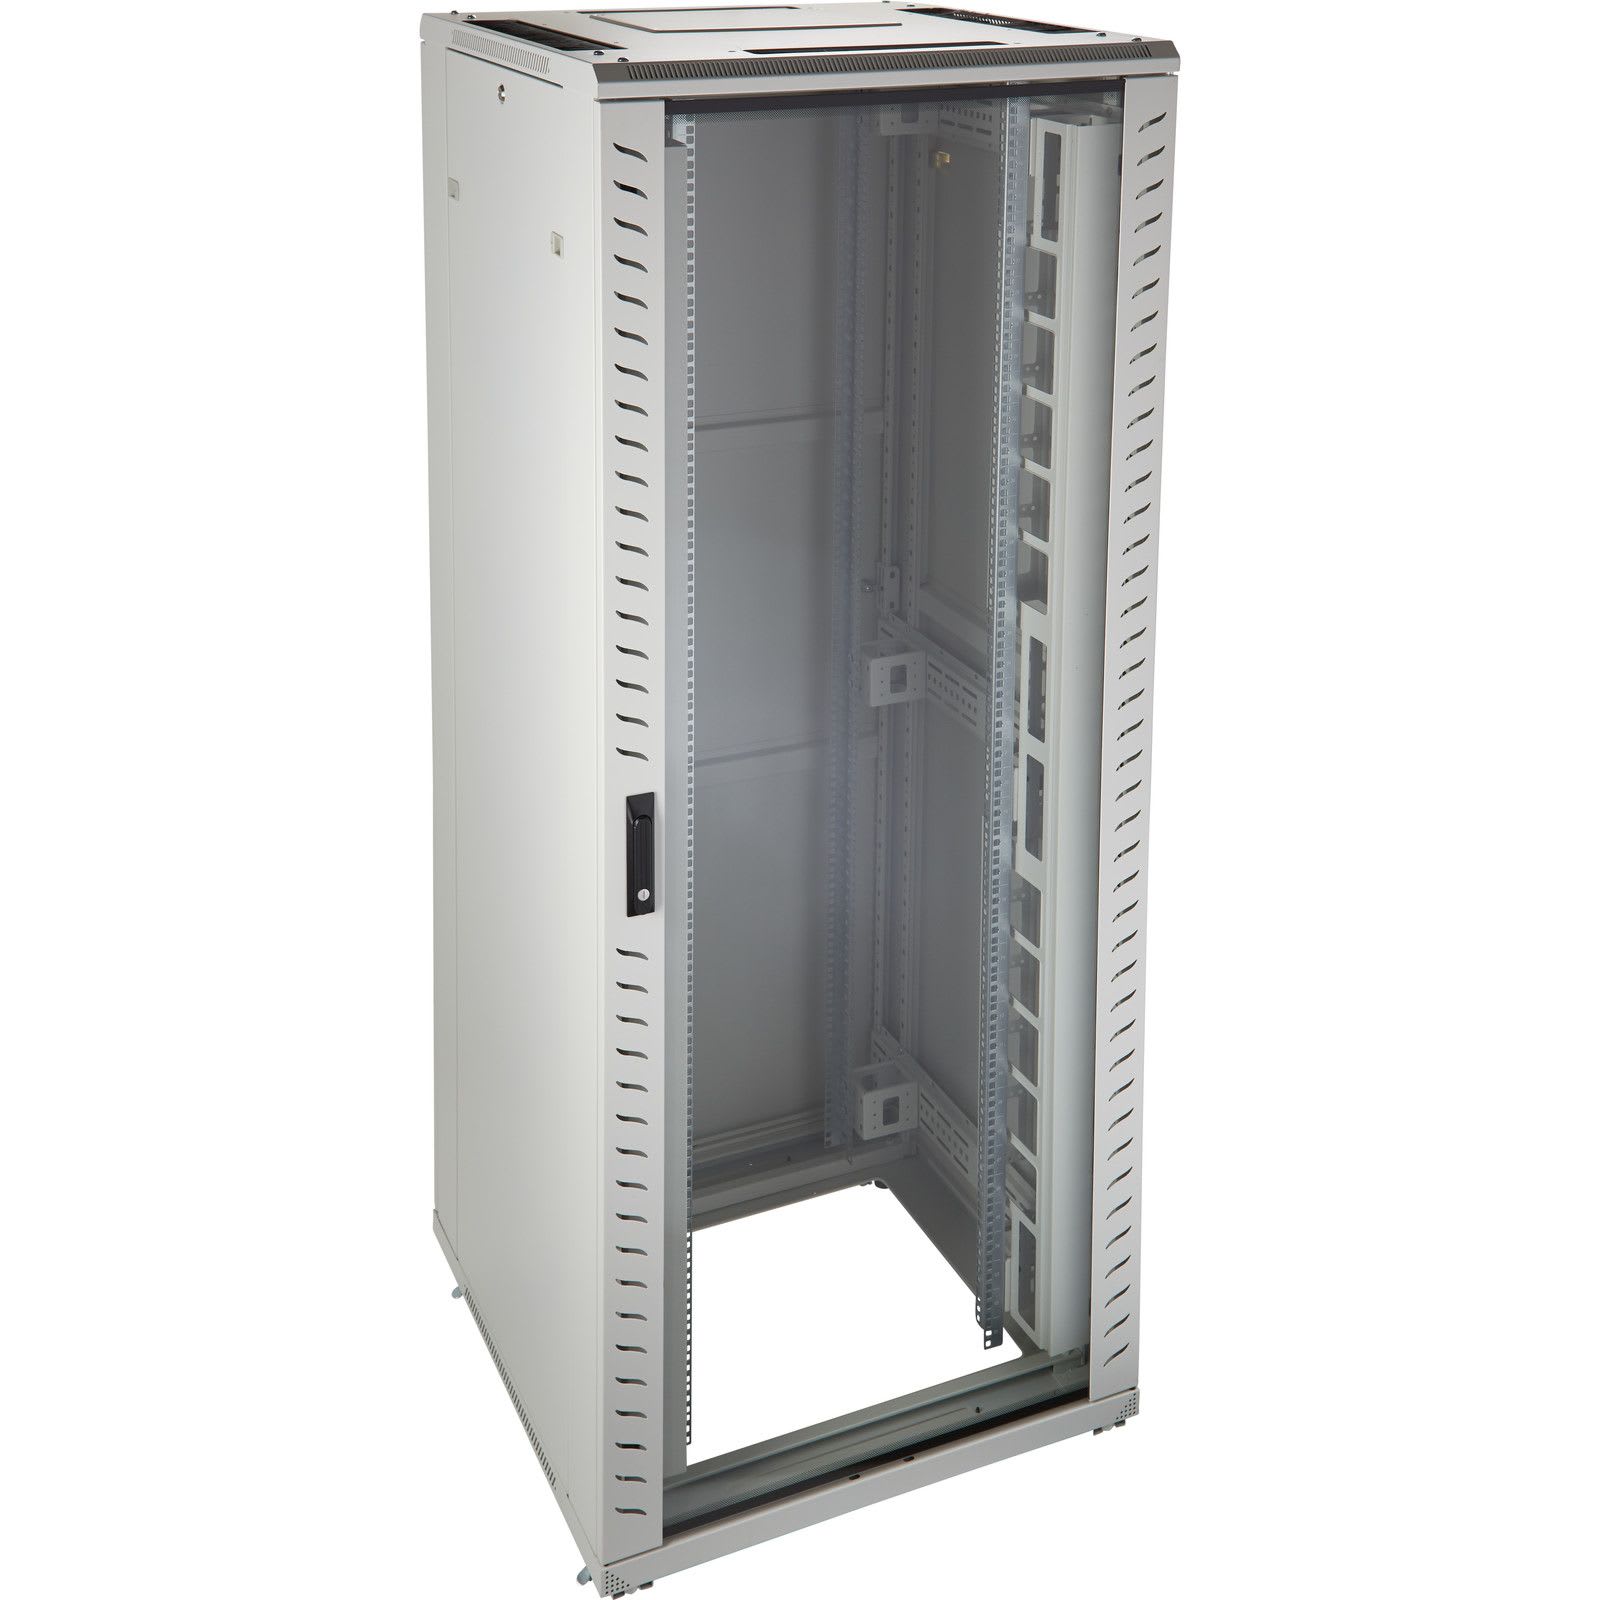 Excel Networking Solutions - Environ CR800 33U Rack 800x1000mm Glass (F) Steel (R) B/Panels F/Mgmt Grey White